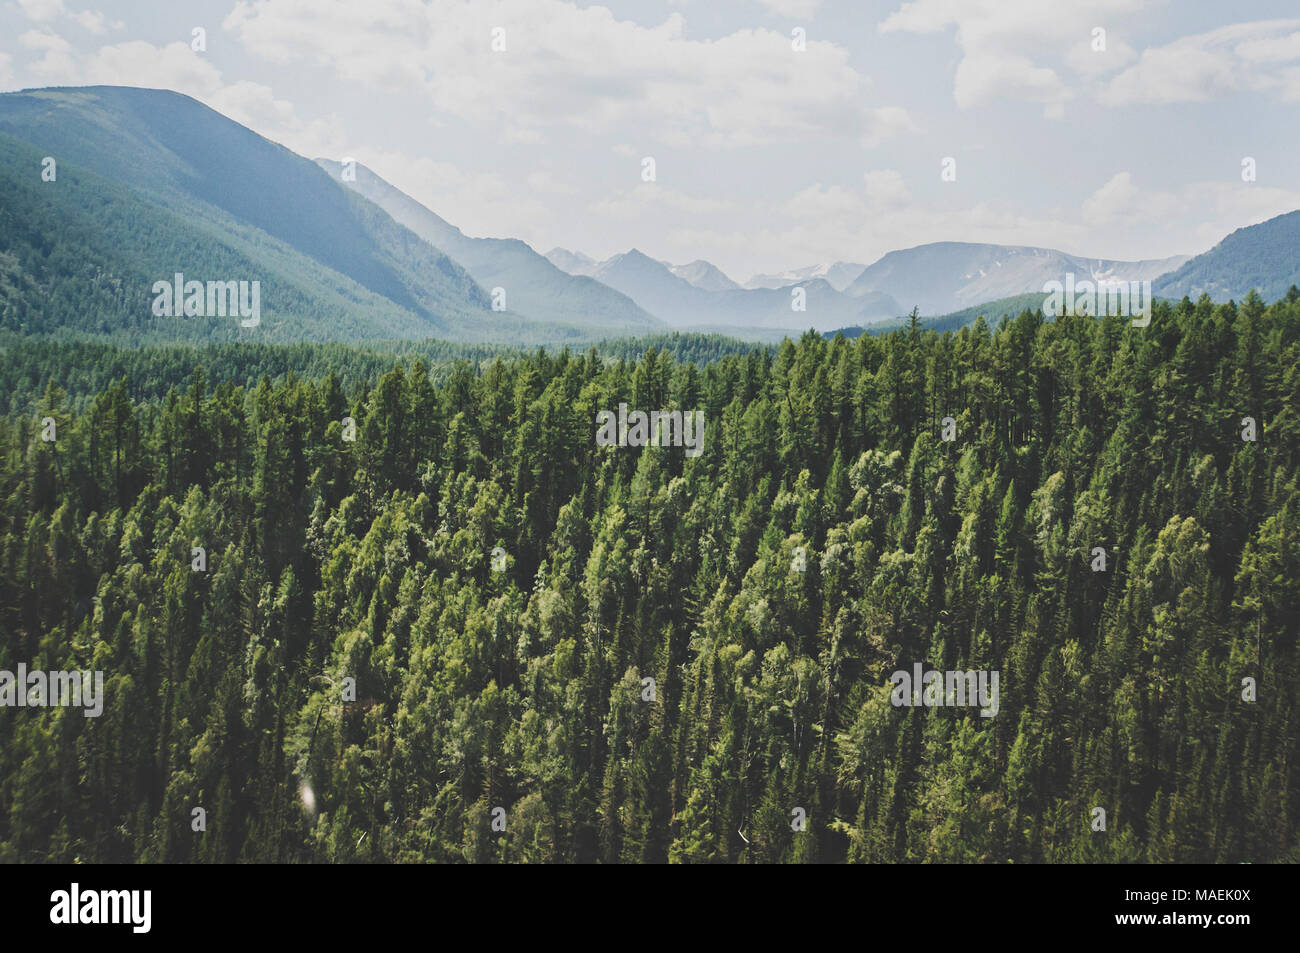 Landscape with forest mountains. Stock Photo